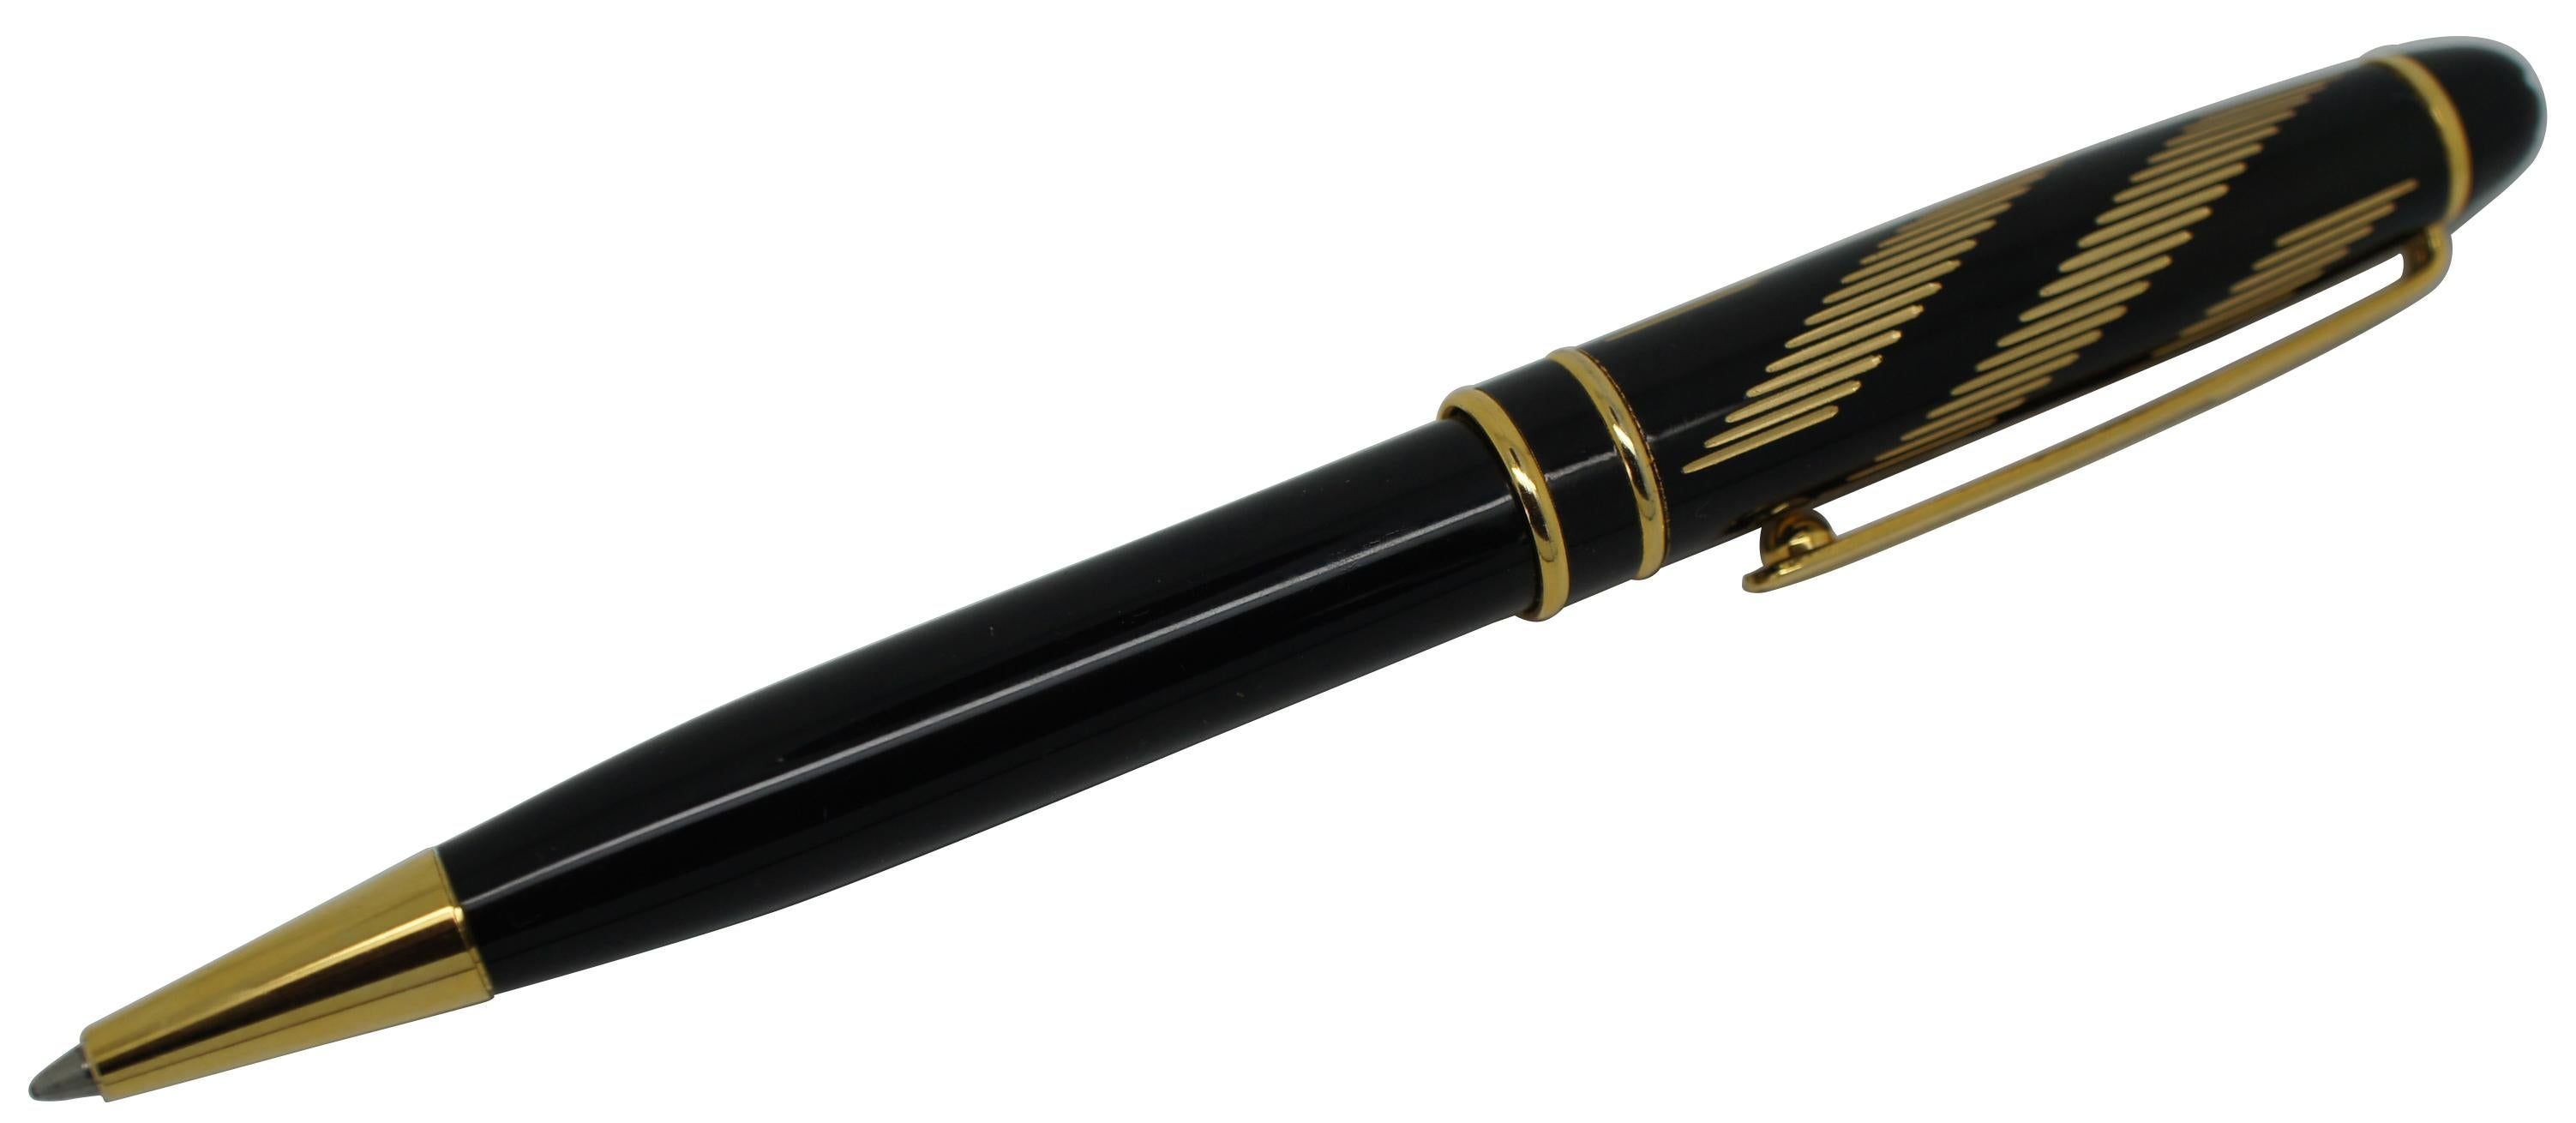 Vintage Montblanc Solitaire ballpoint pen in black with a gold hatch mark diagonal stripes on the barrel.
  